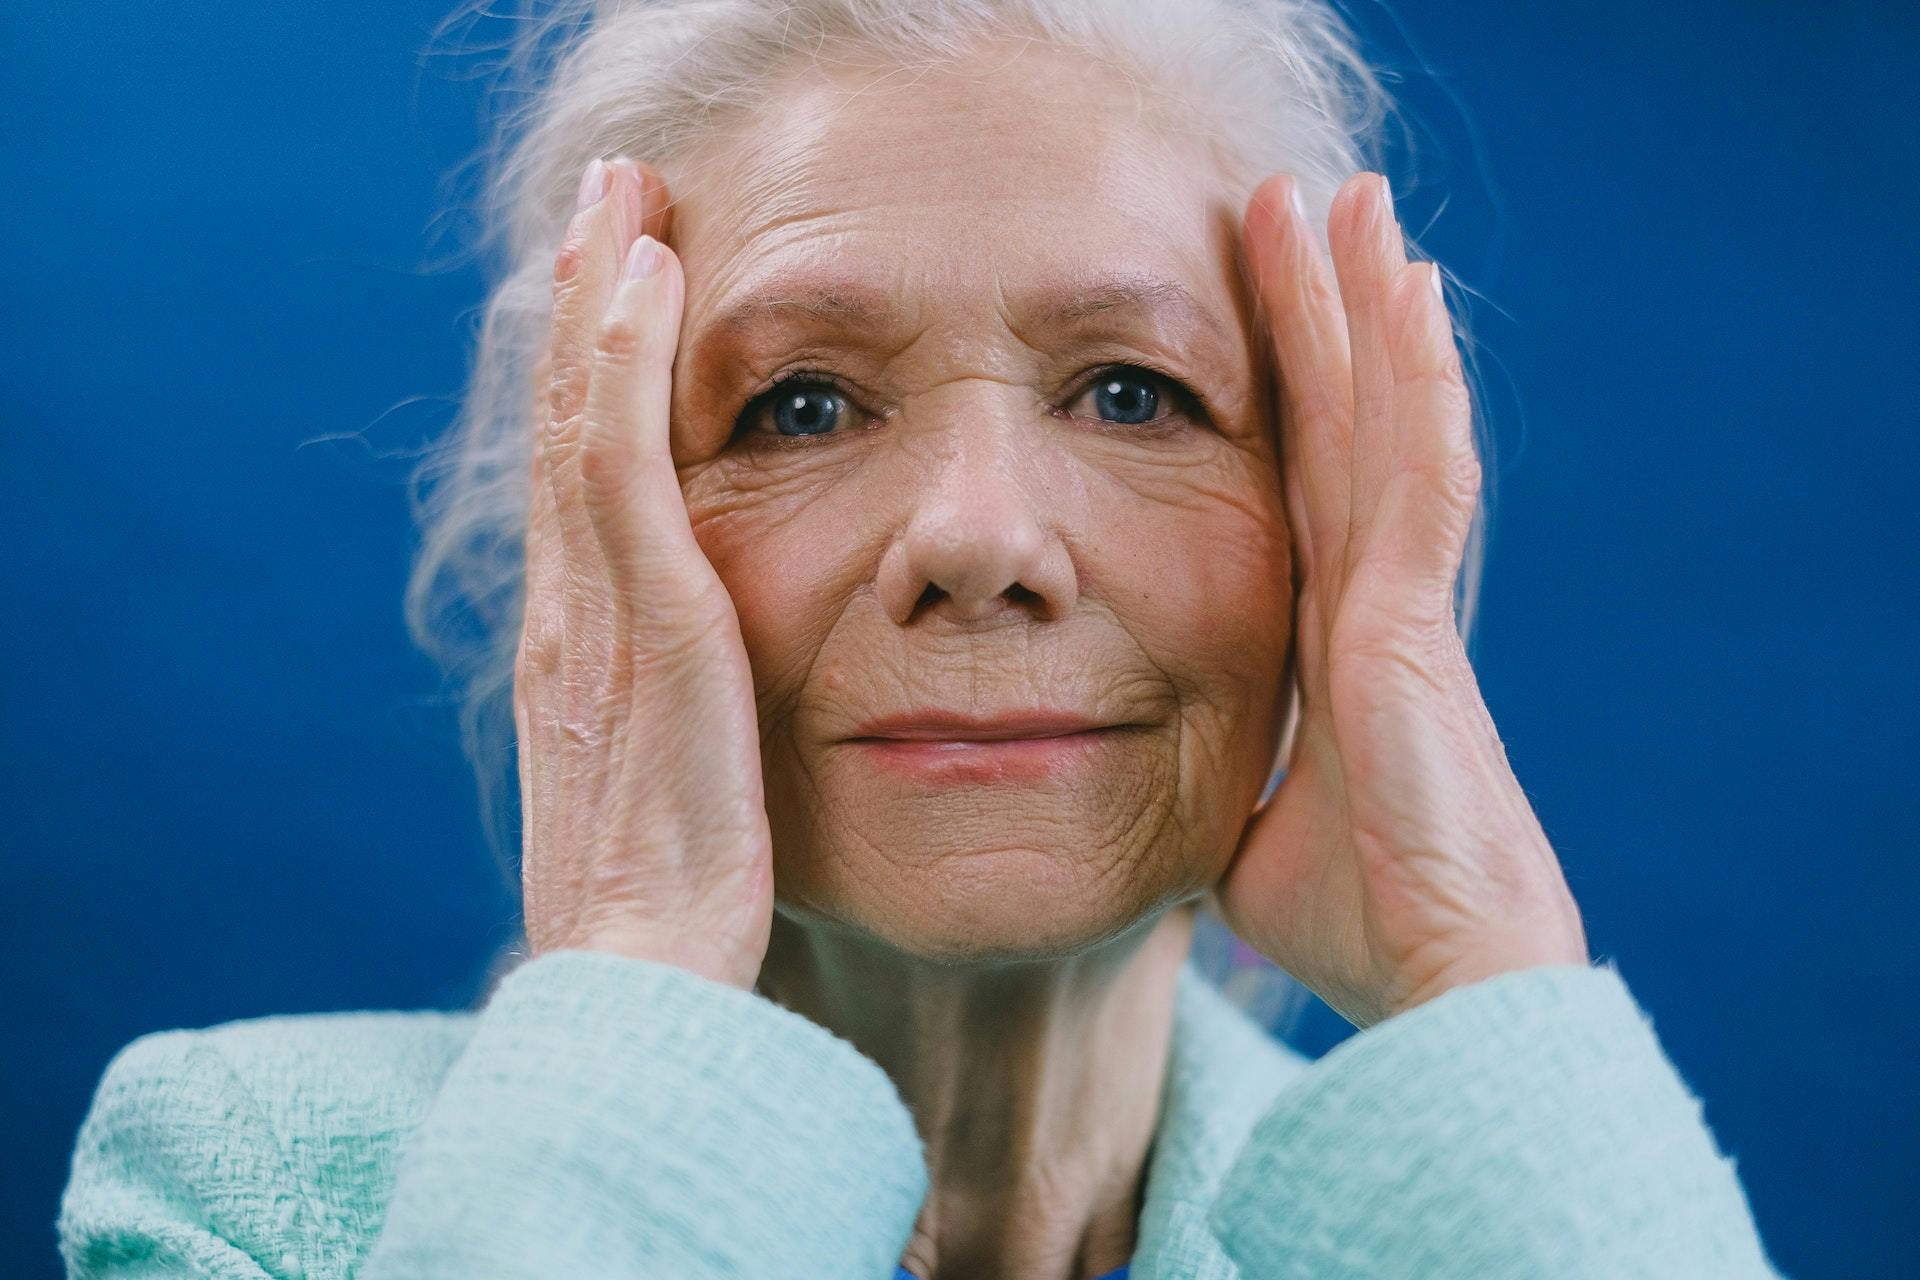 Old Woman Holding Head - Does Medicare Cover Migraines.jpg